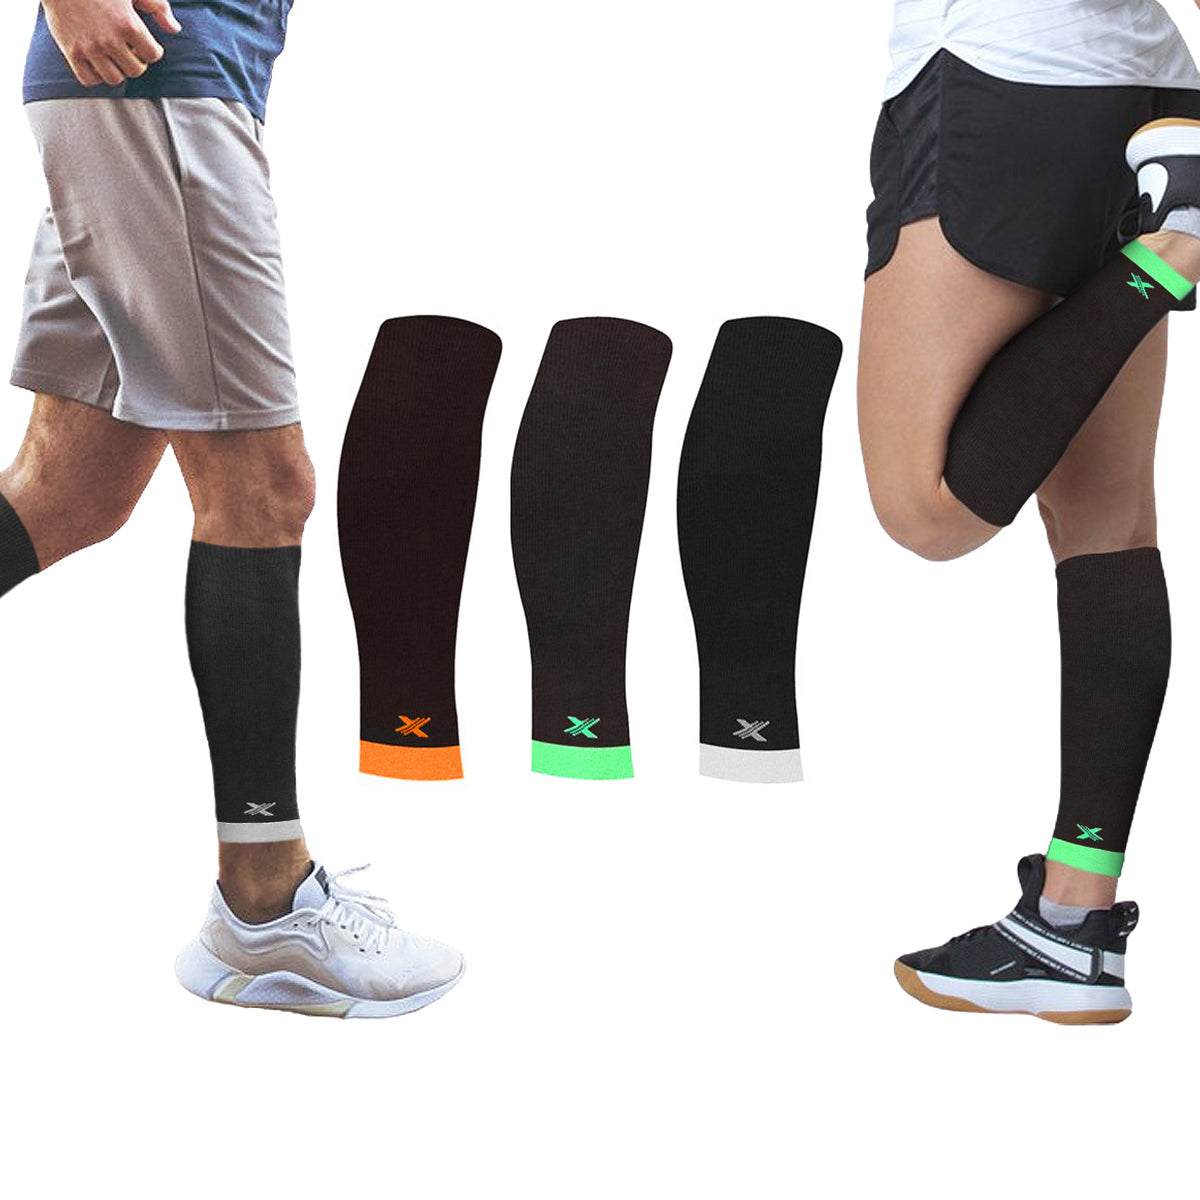 3-Pairs Elite Lightweight Support Pain Relief Calf Compression Sleeves